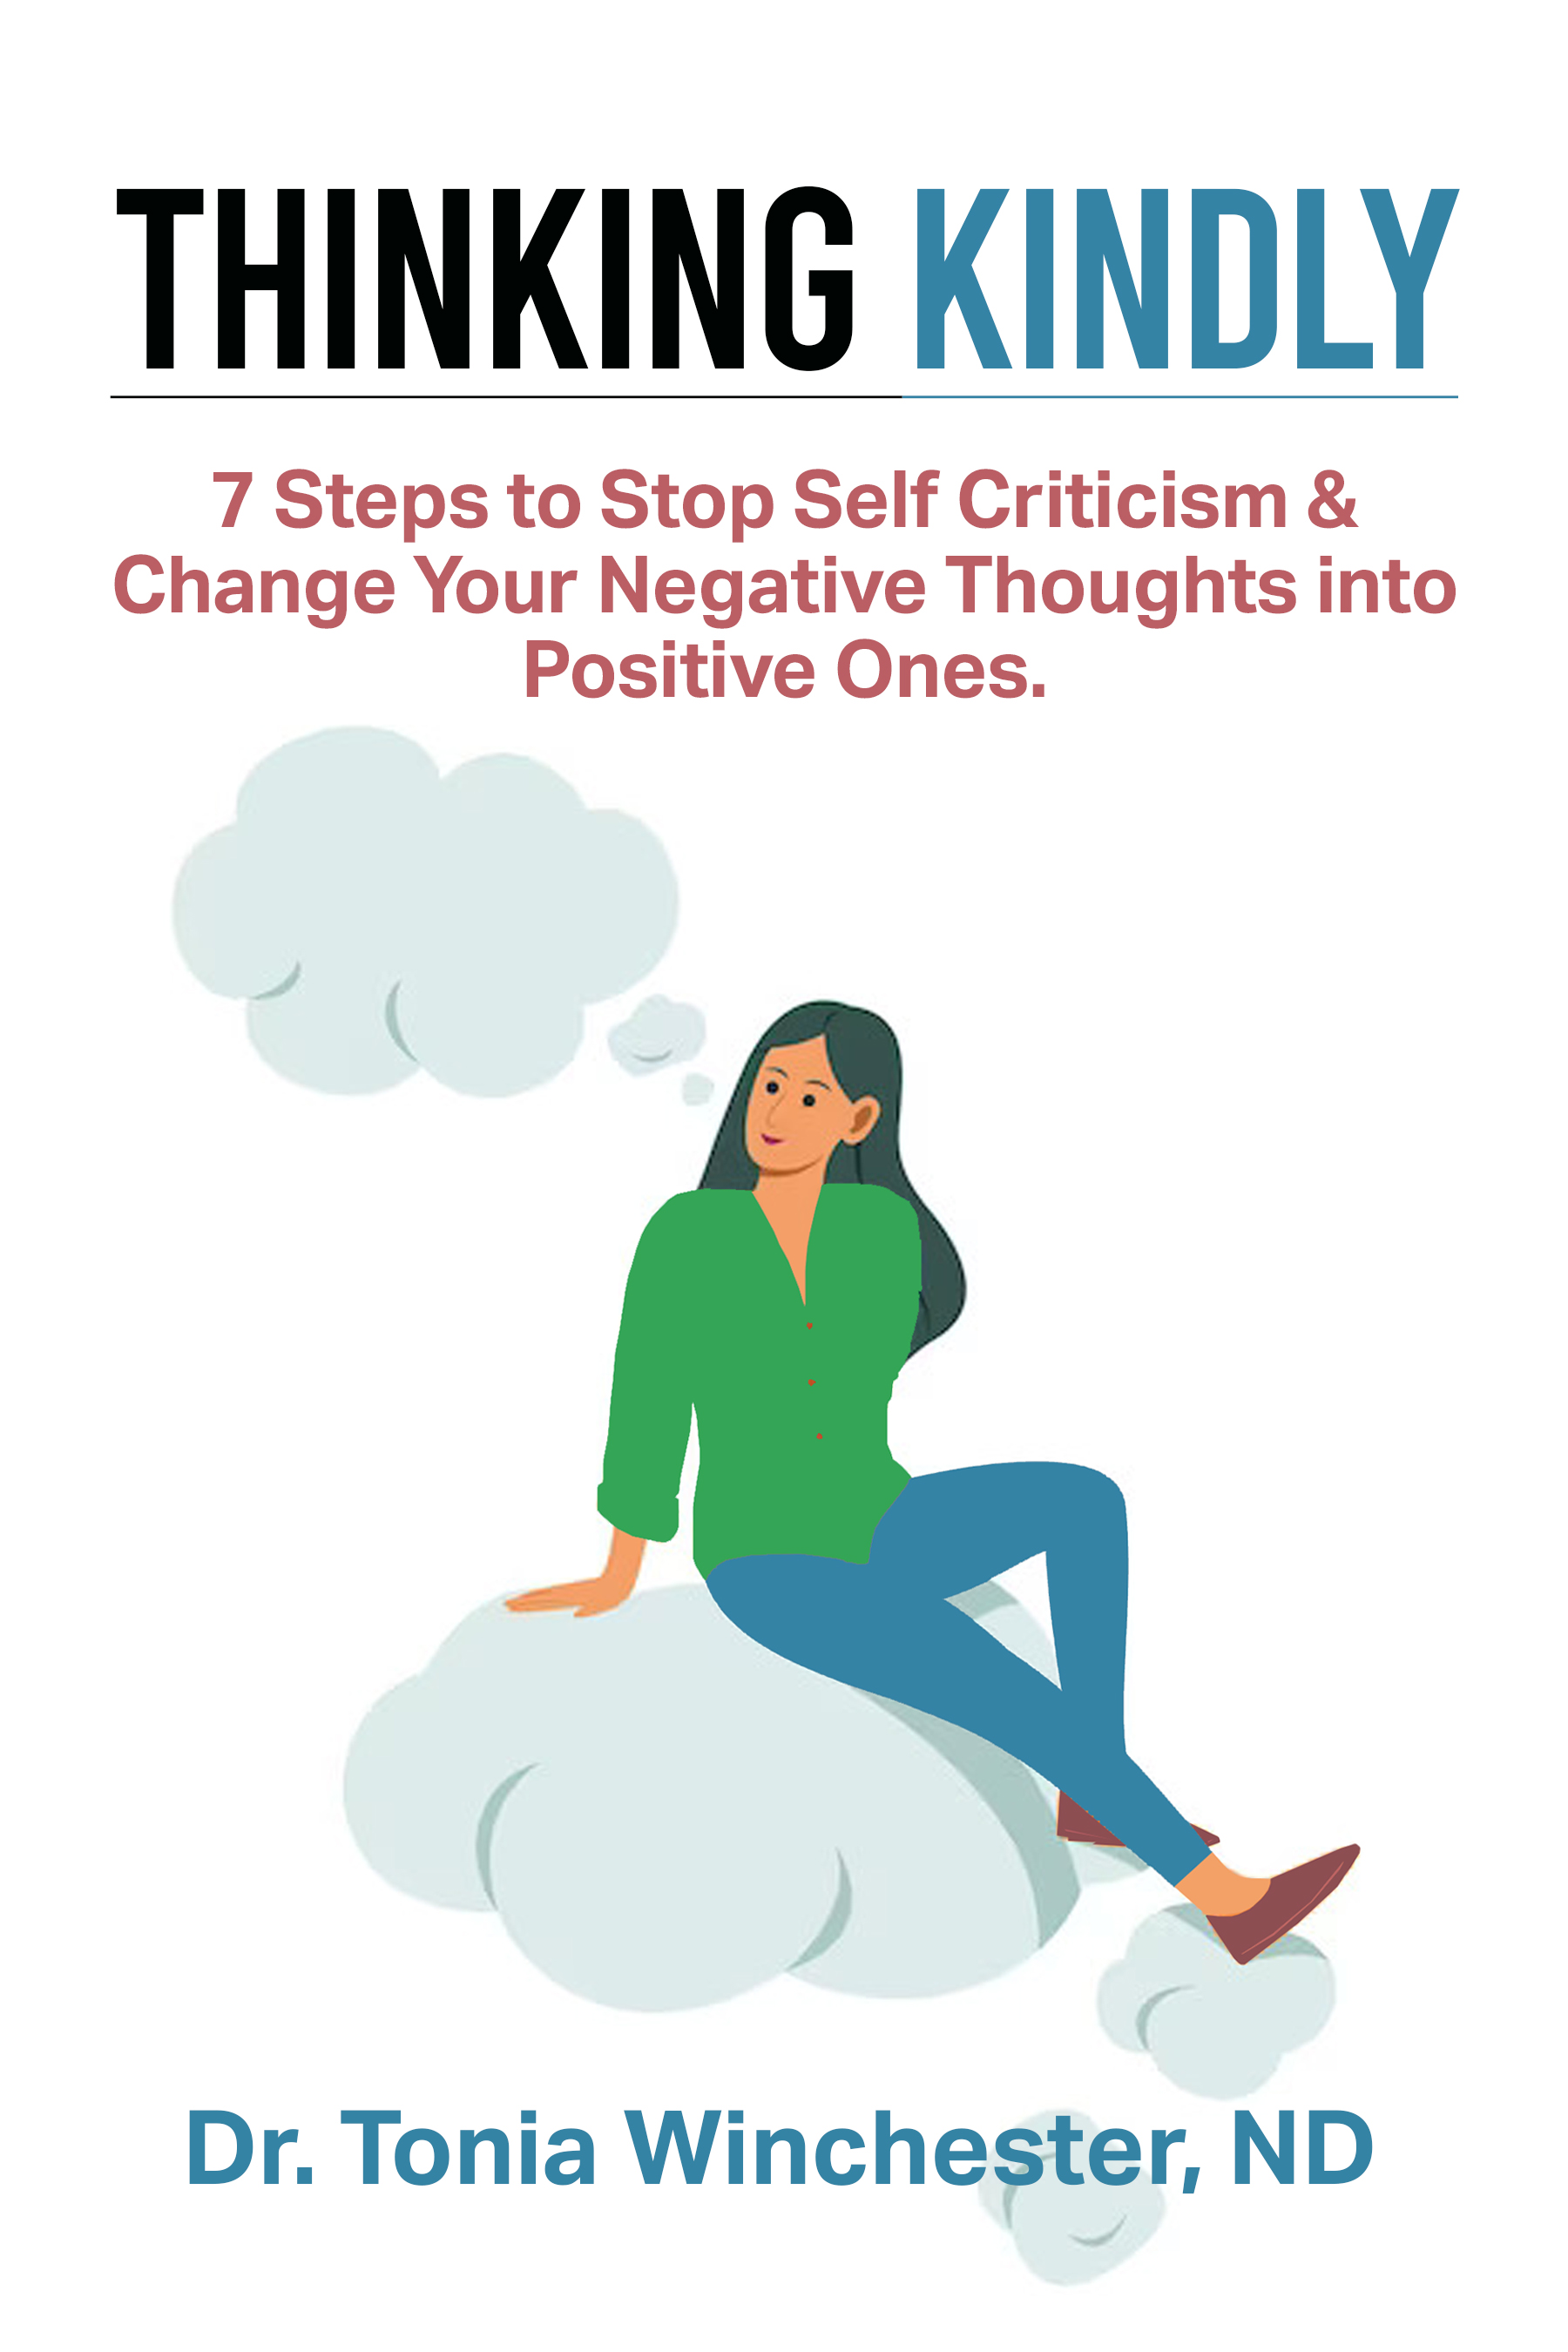 Thinking Kindly: 7 Steps to Stop Self Criticism and Change Negative Thoughts into Positive Ones. 